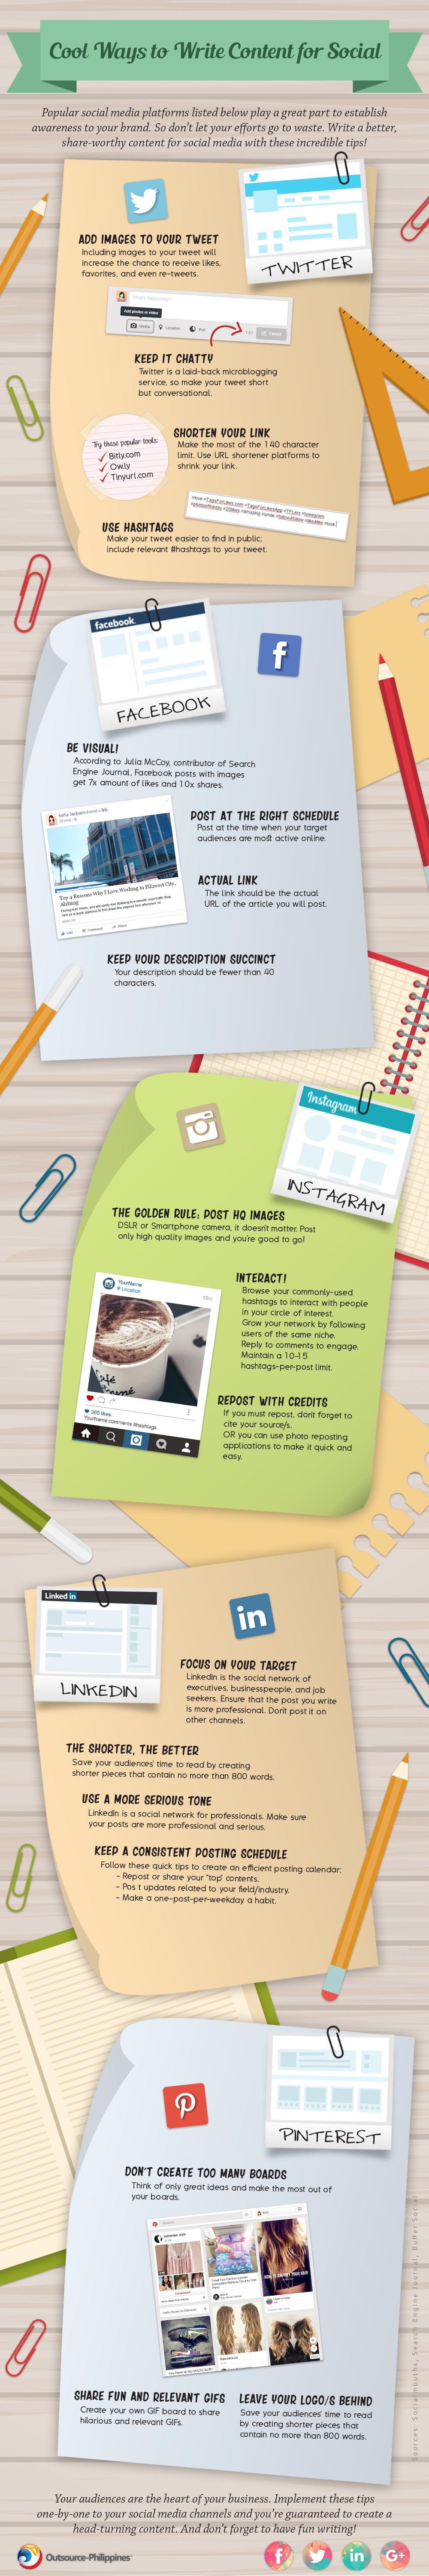 An infographic showing the Great Ways to Write Social Media Content